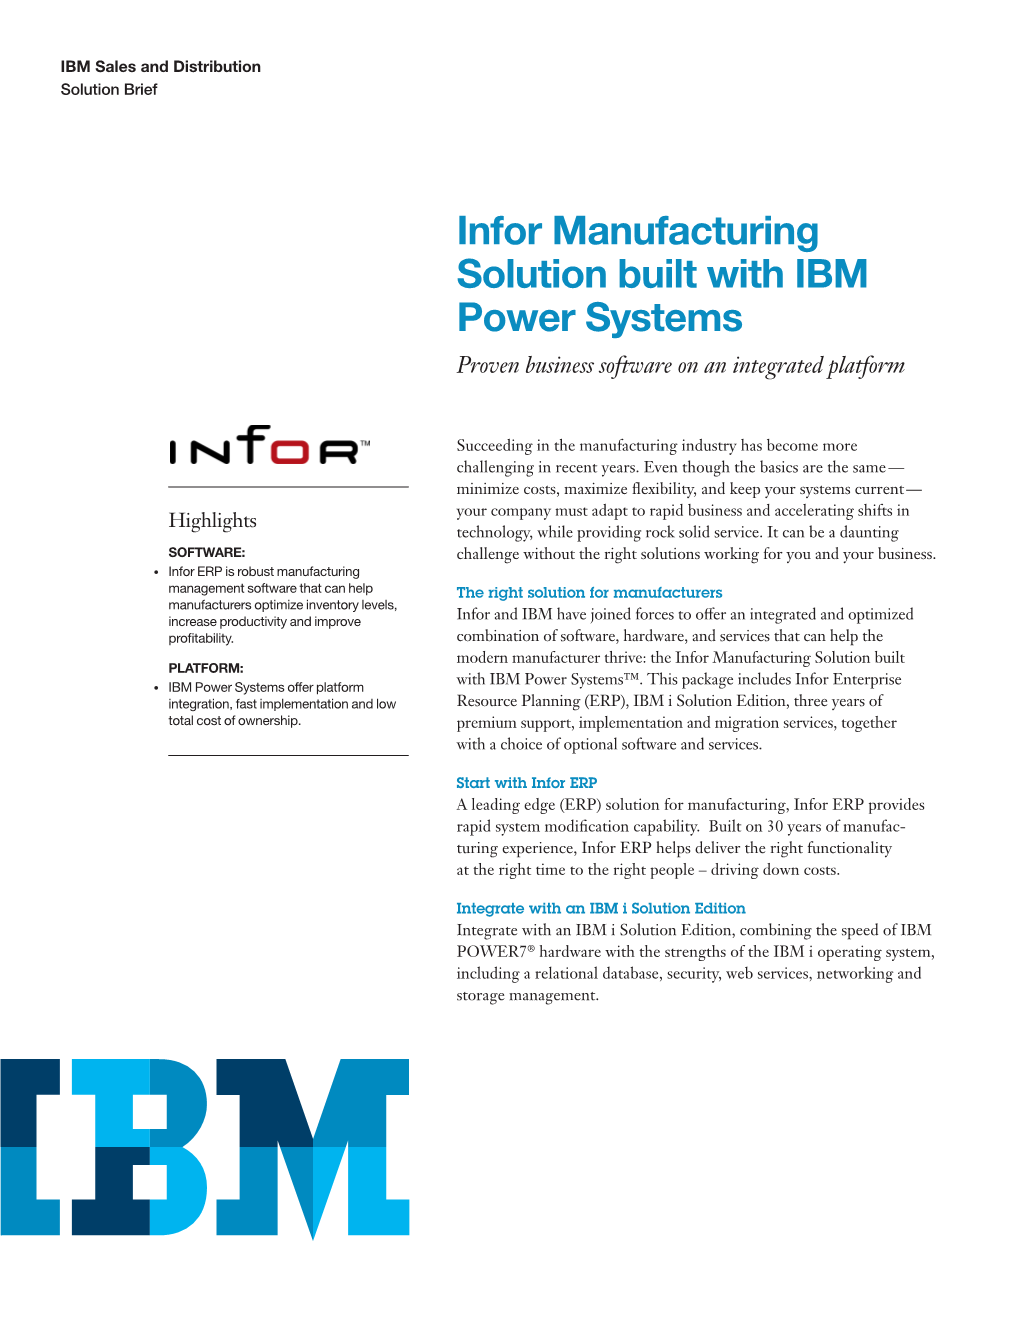 Infor Manufacturing Solution Built with IBM Power Systems Proven Business Software on an Integrated Platform